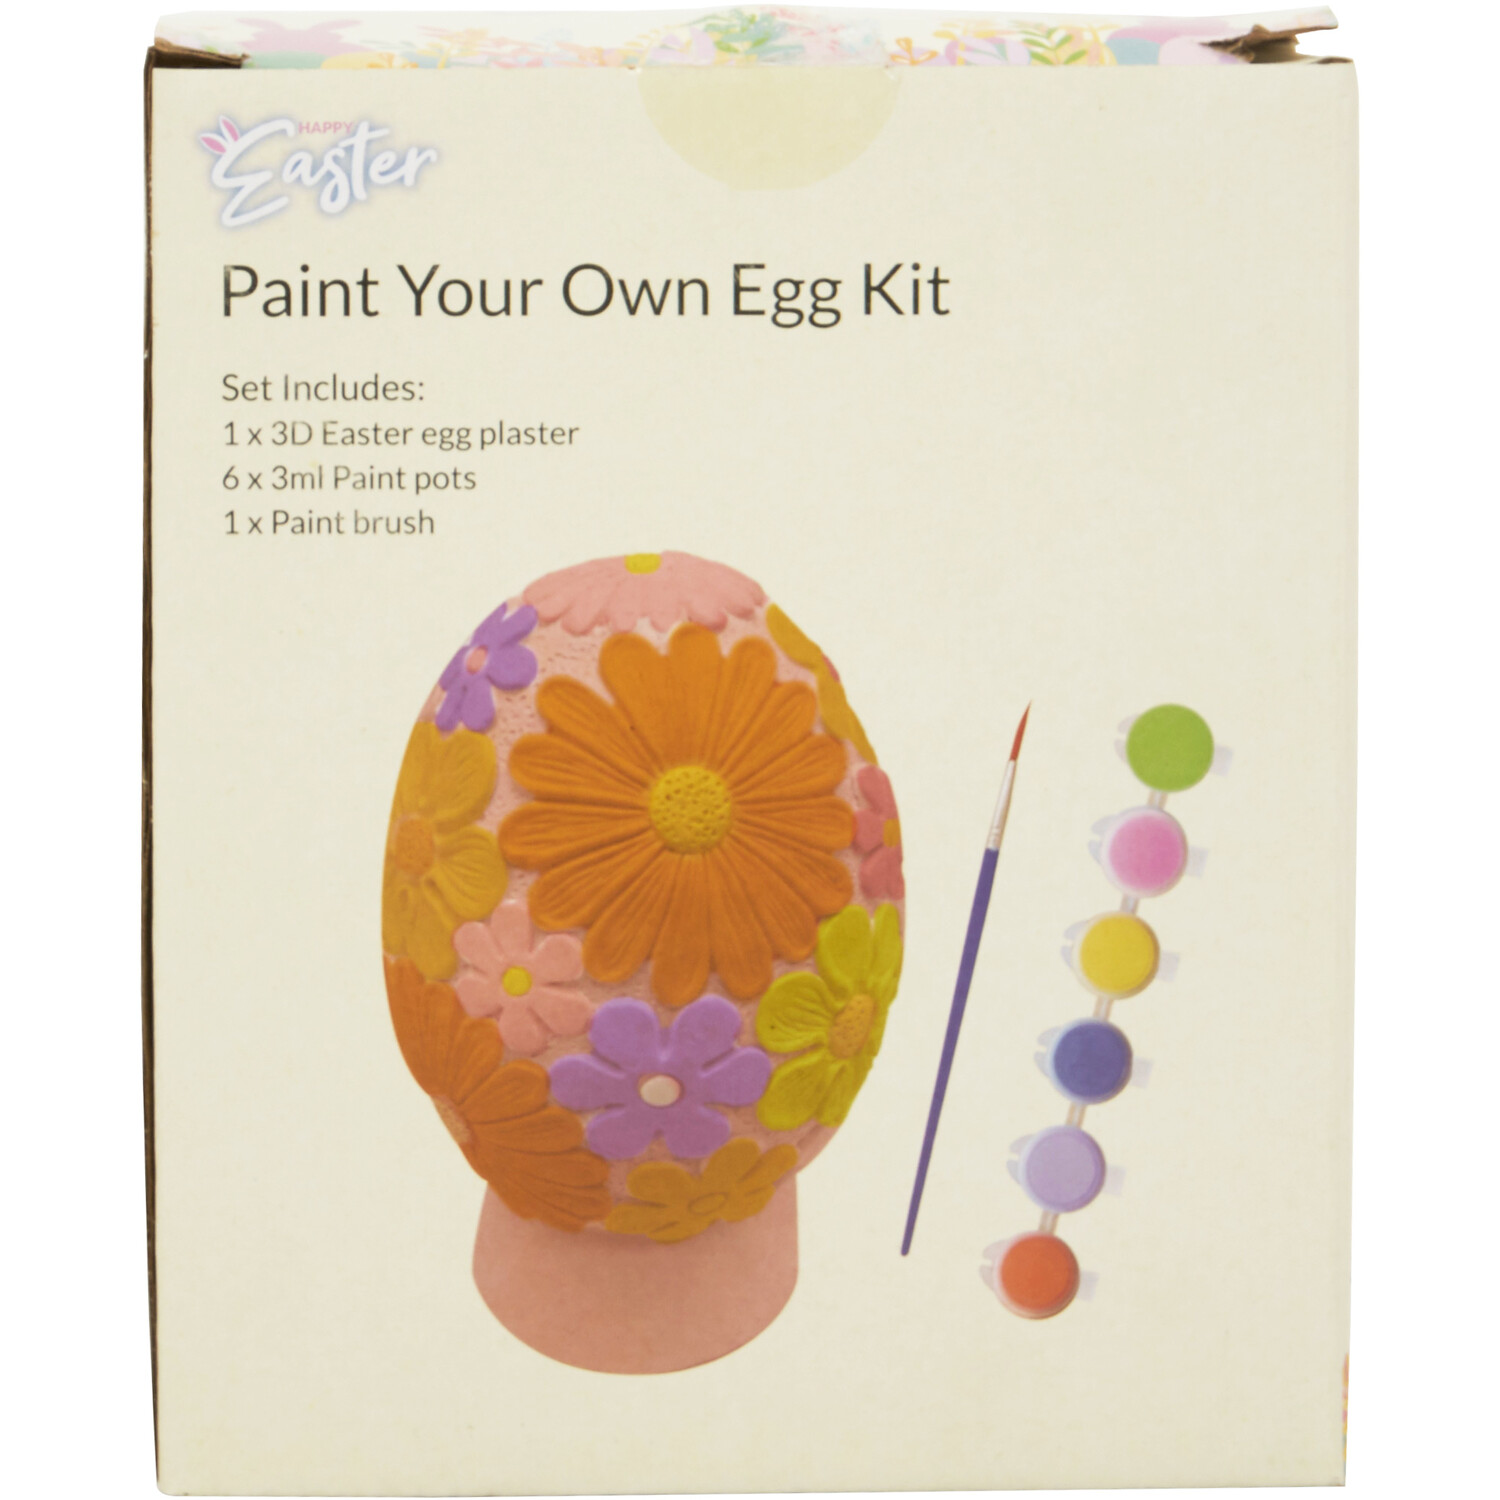 Paint Your Own Egg Image 3